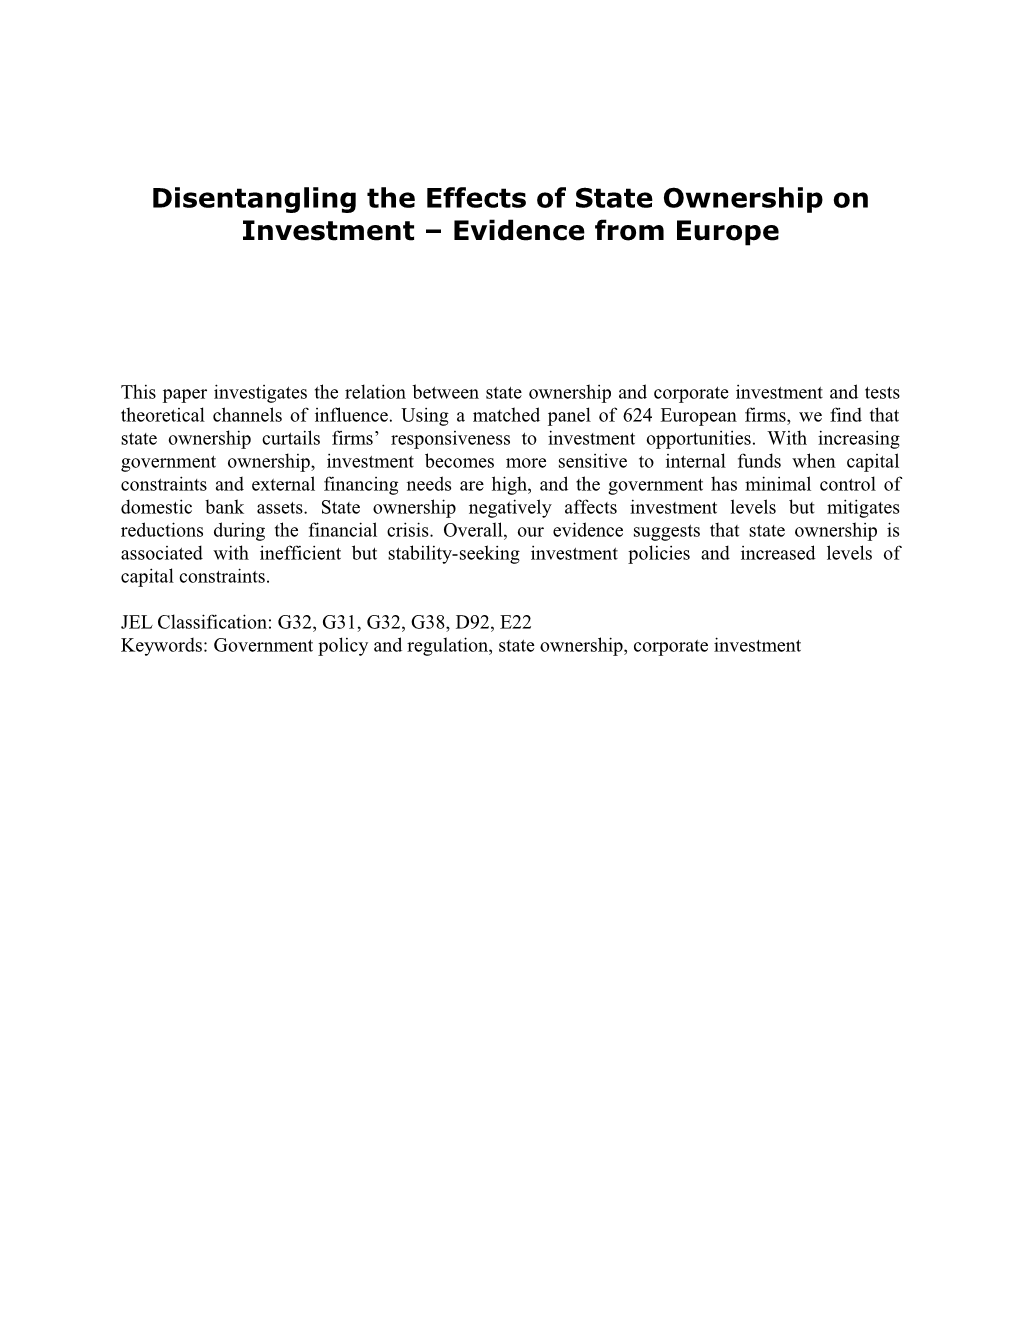 Disentangling the Effects of State Ownership on Investment Evidencefrom Europe